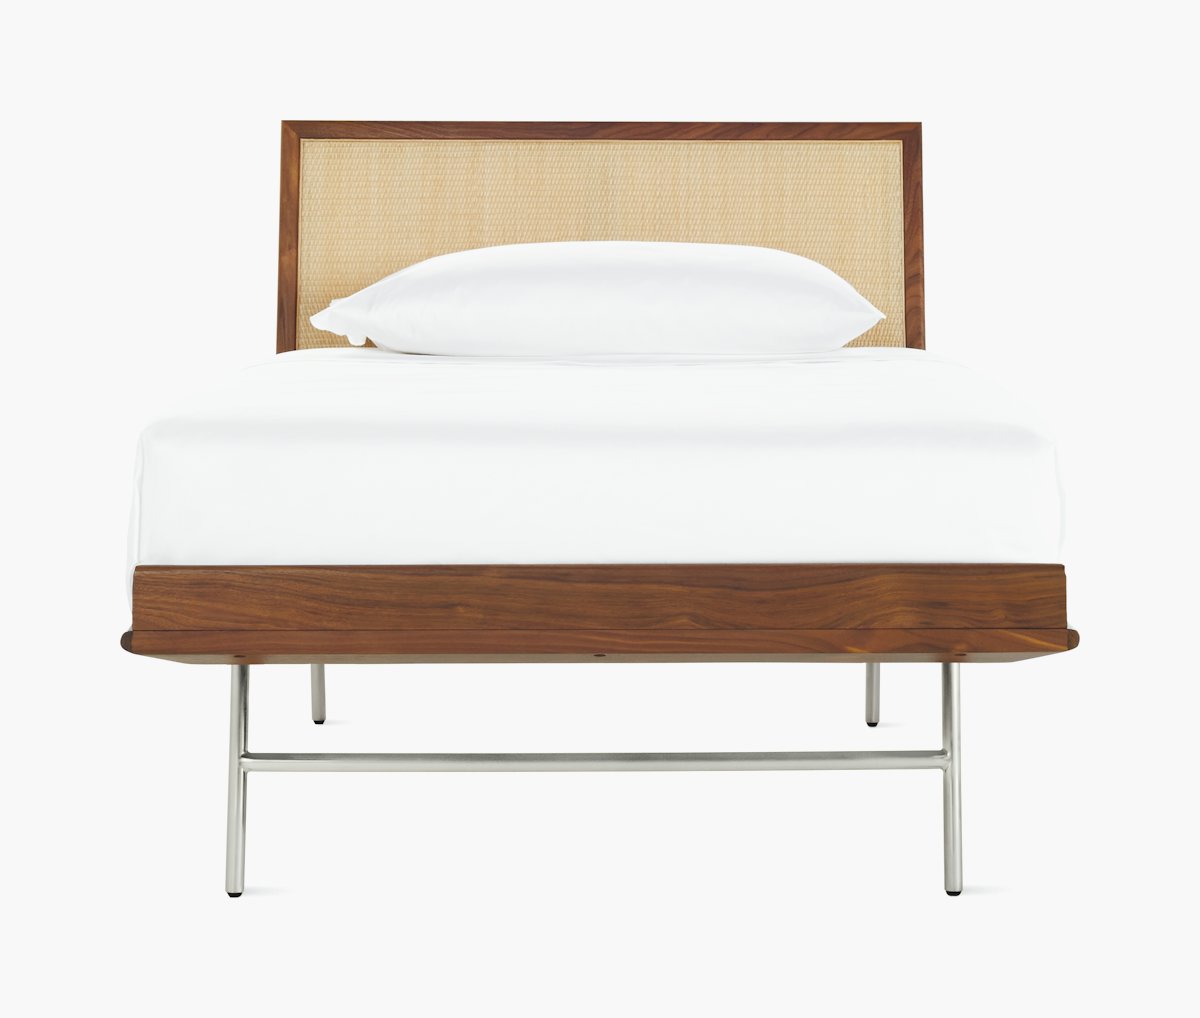 Nelson Thin Edge Bed, Cane